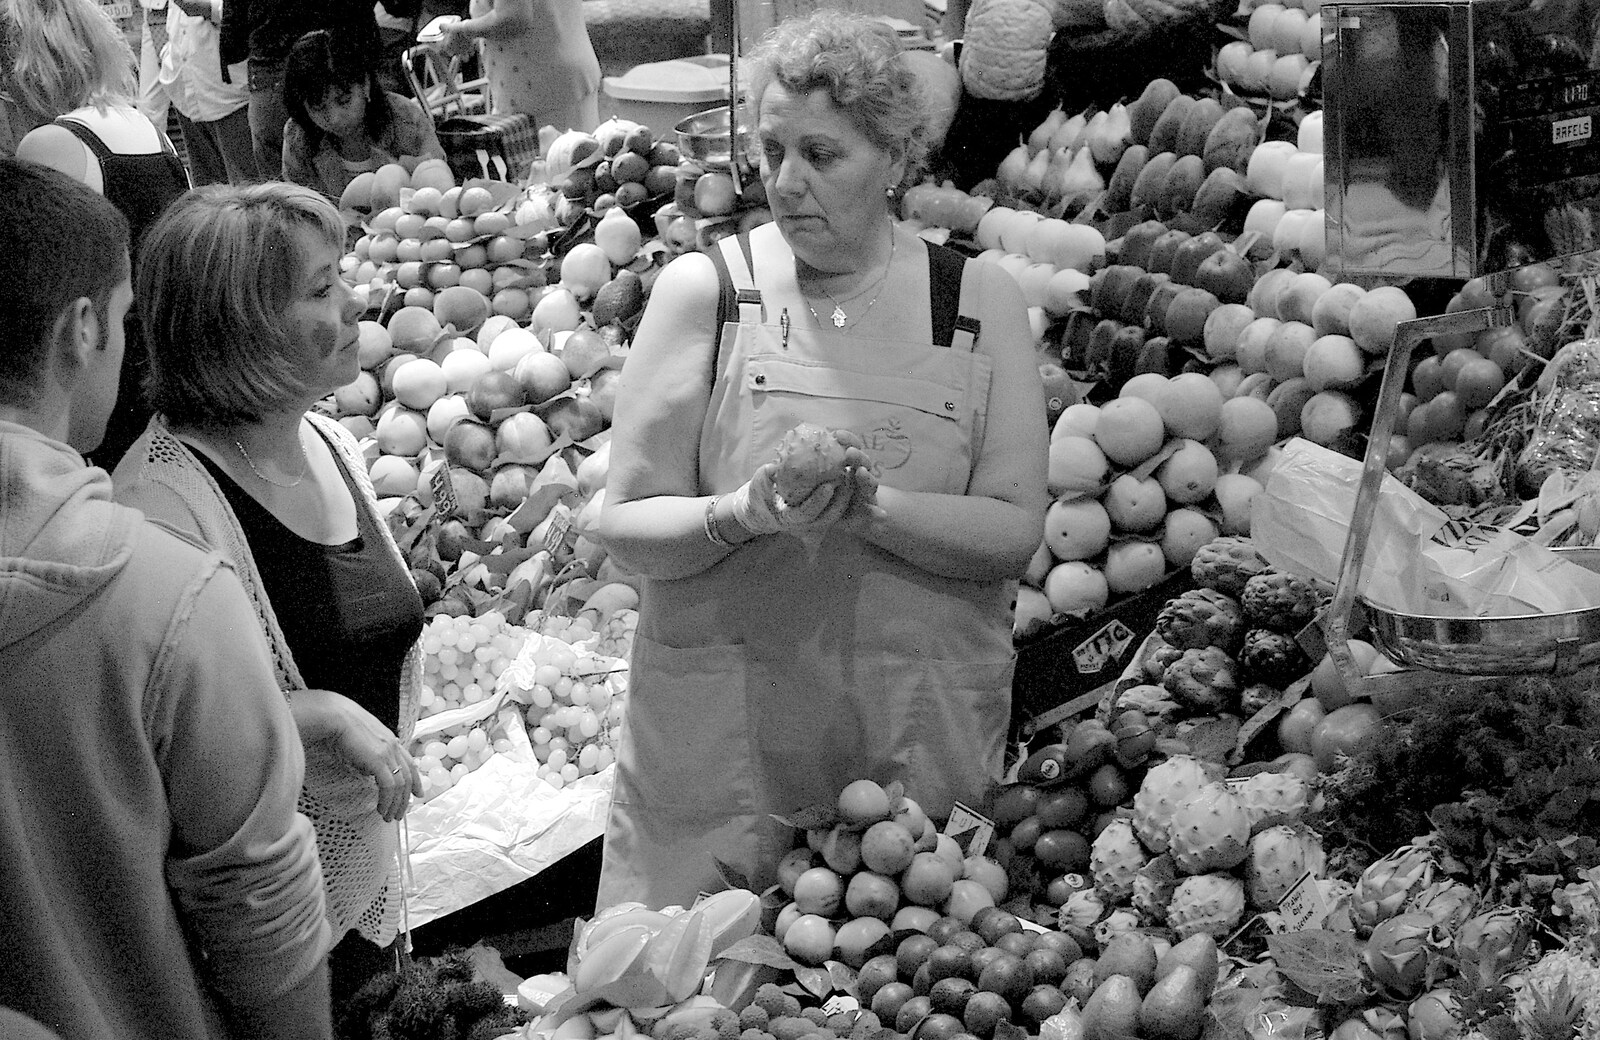 The artichoke woman looks at a customer sternly from Two Days in Barcelona, Catalunya, Spain - 22nd September 2006